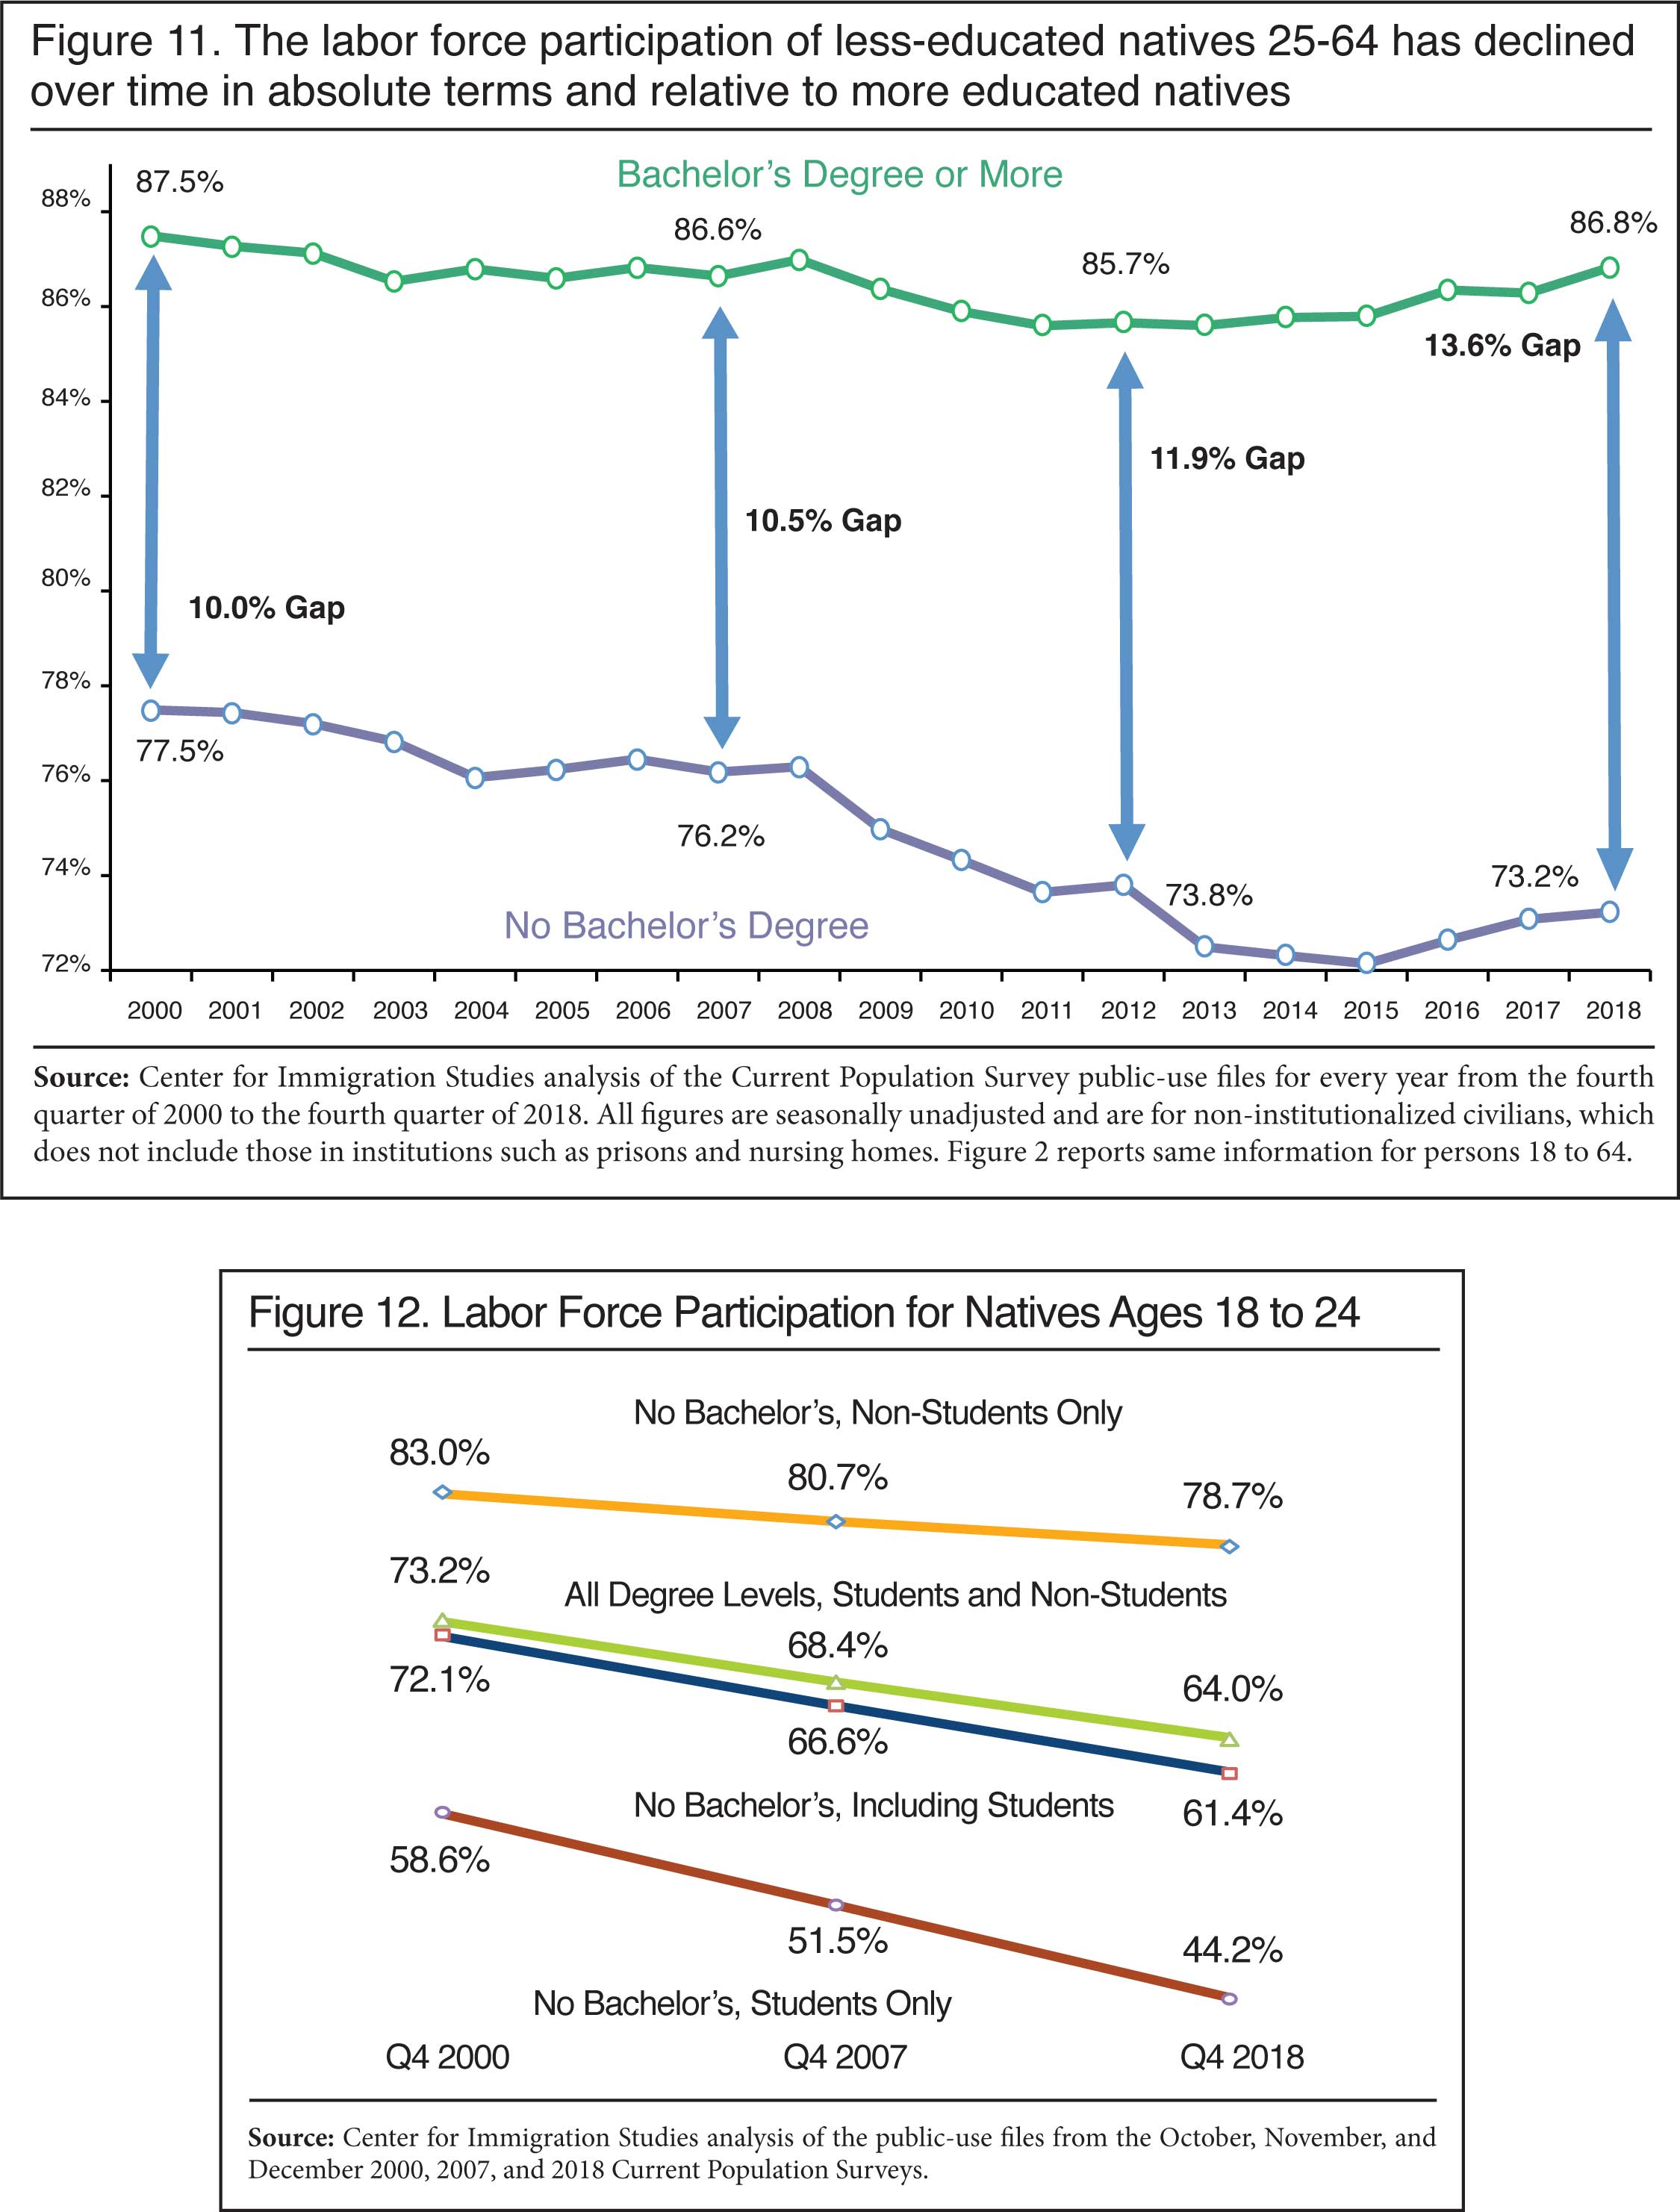 Graph: The labor force participation of less educated natives 25-64 has declined over time in absolute terms and relative to more educated natives